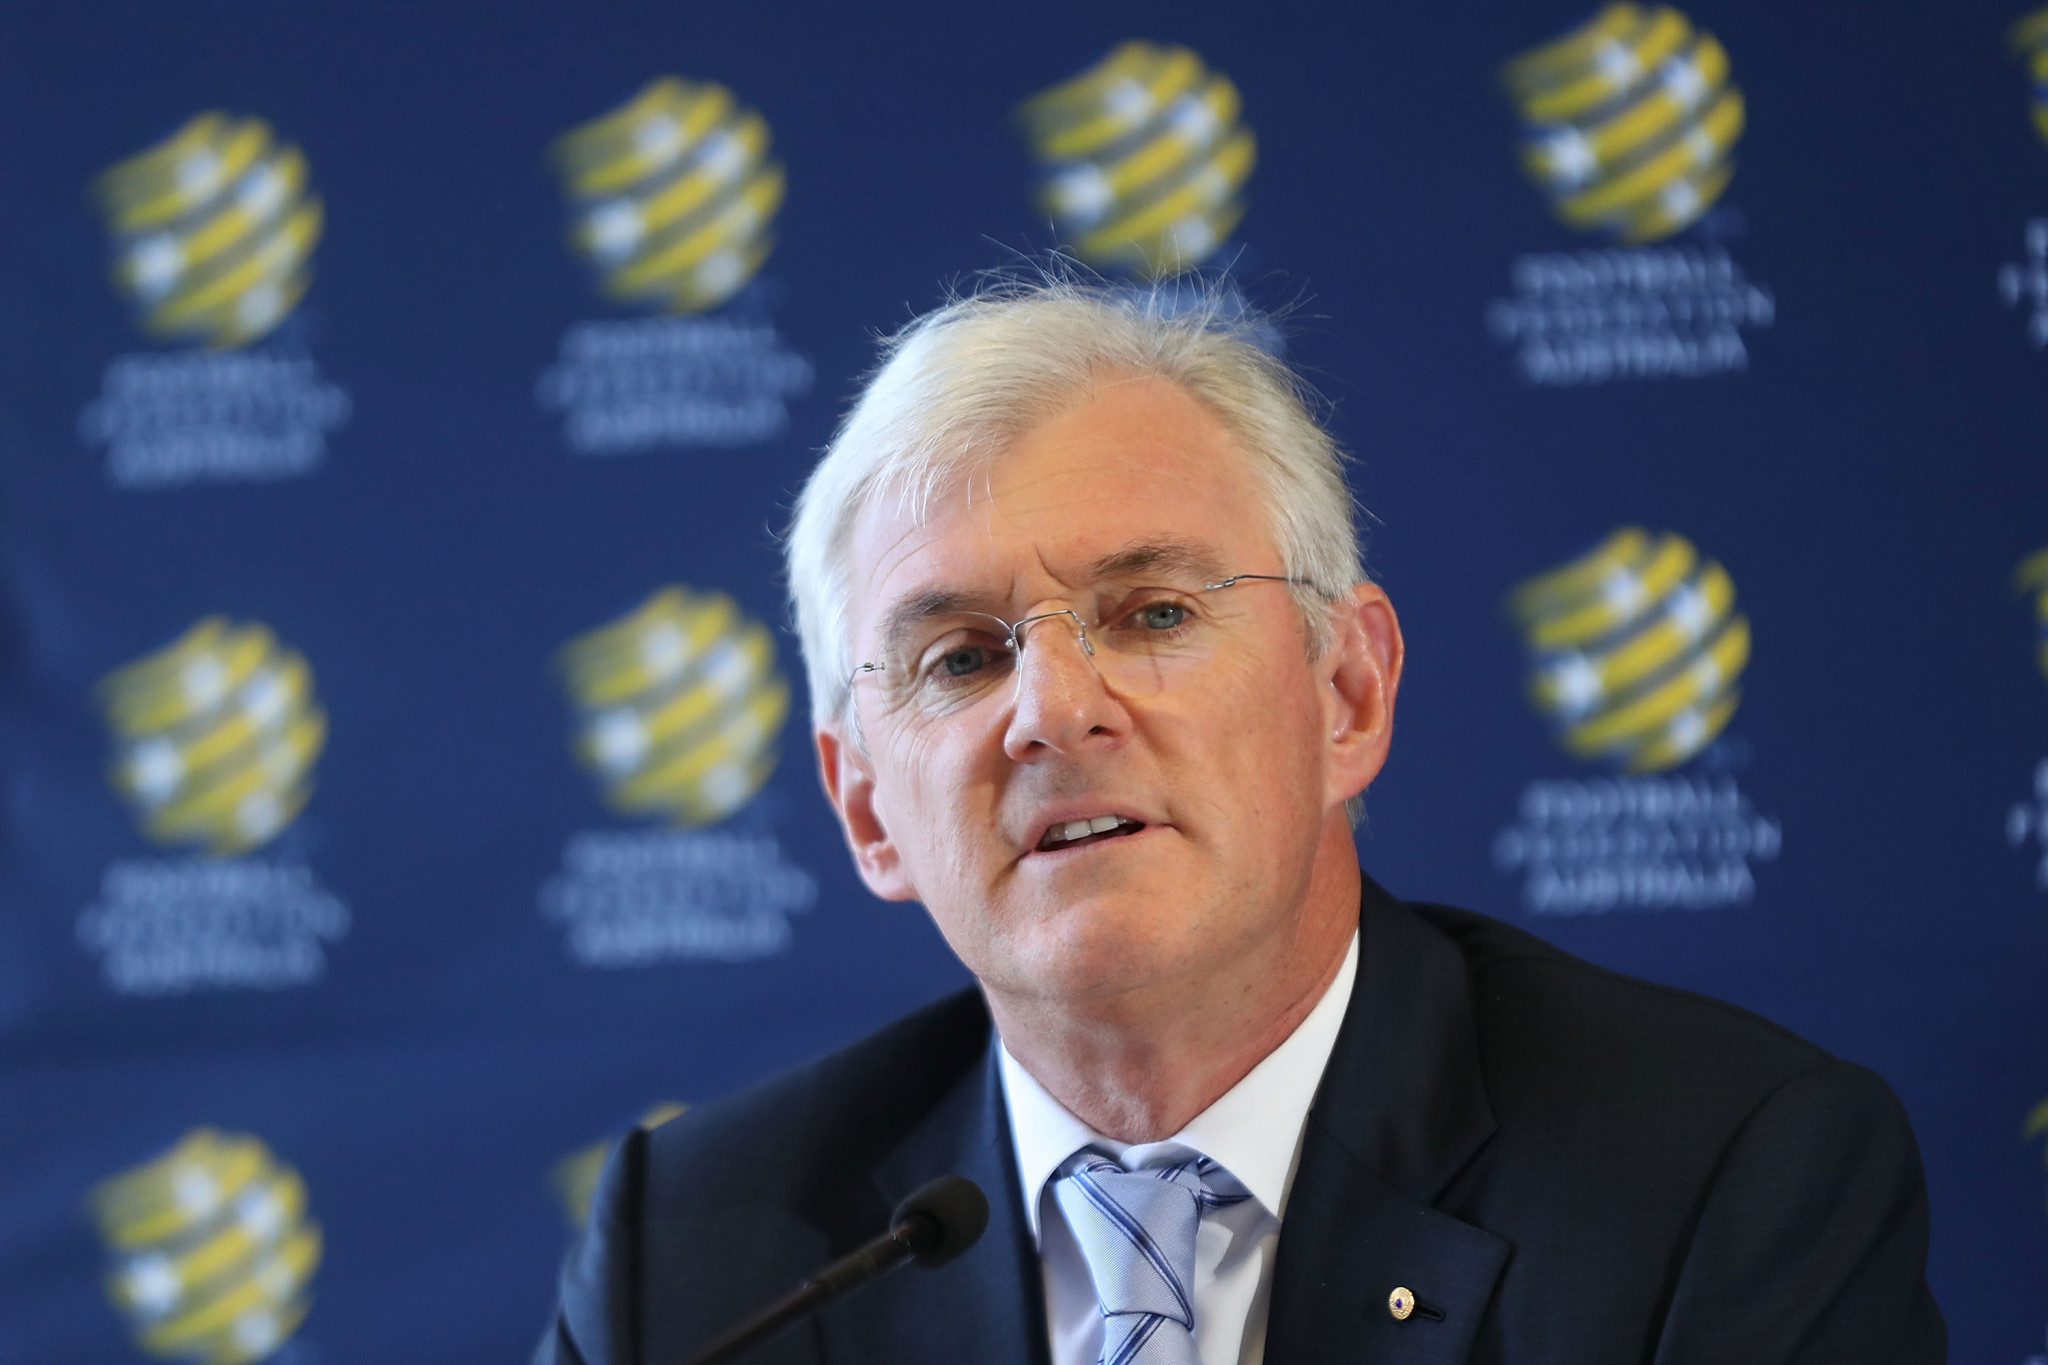 Steven Lowy has criticised some of the proposed changes ©Getty Images